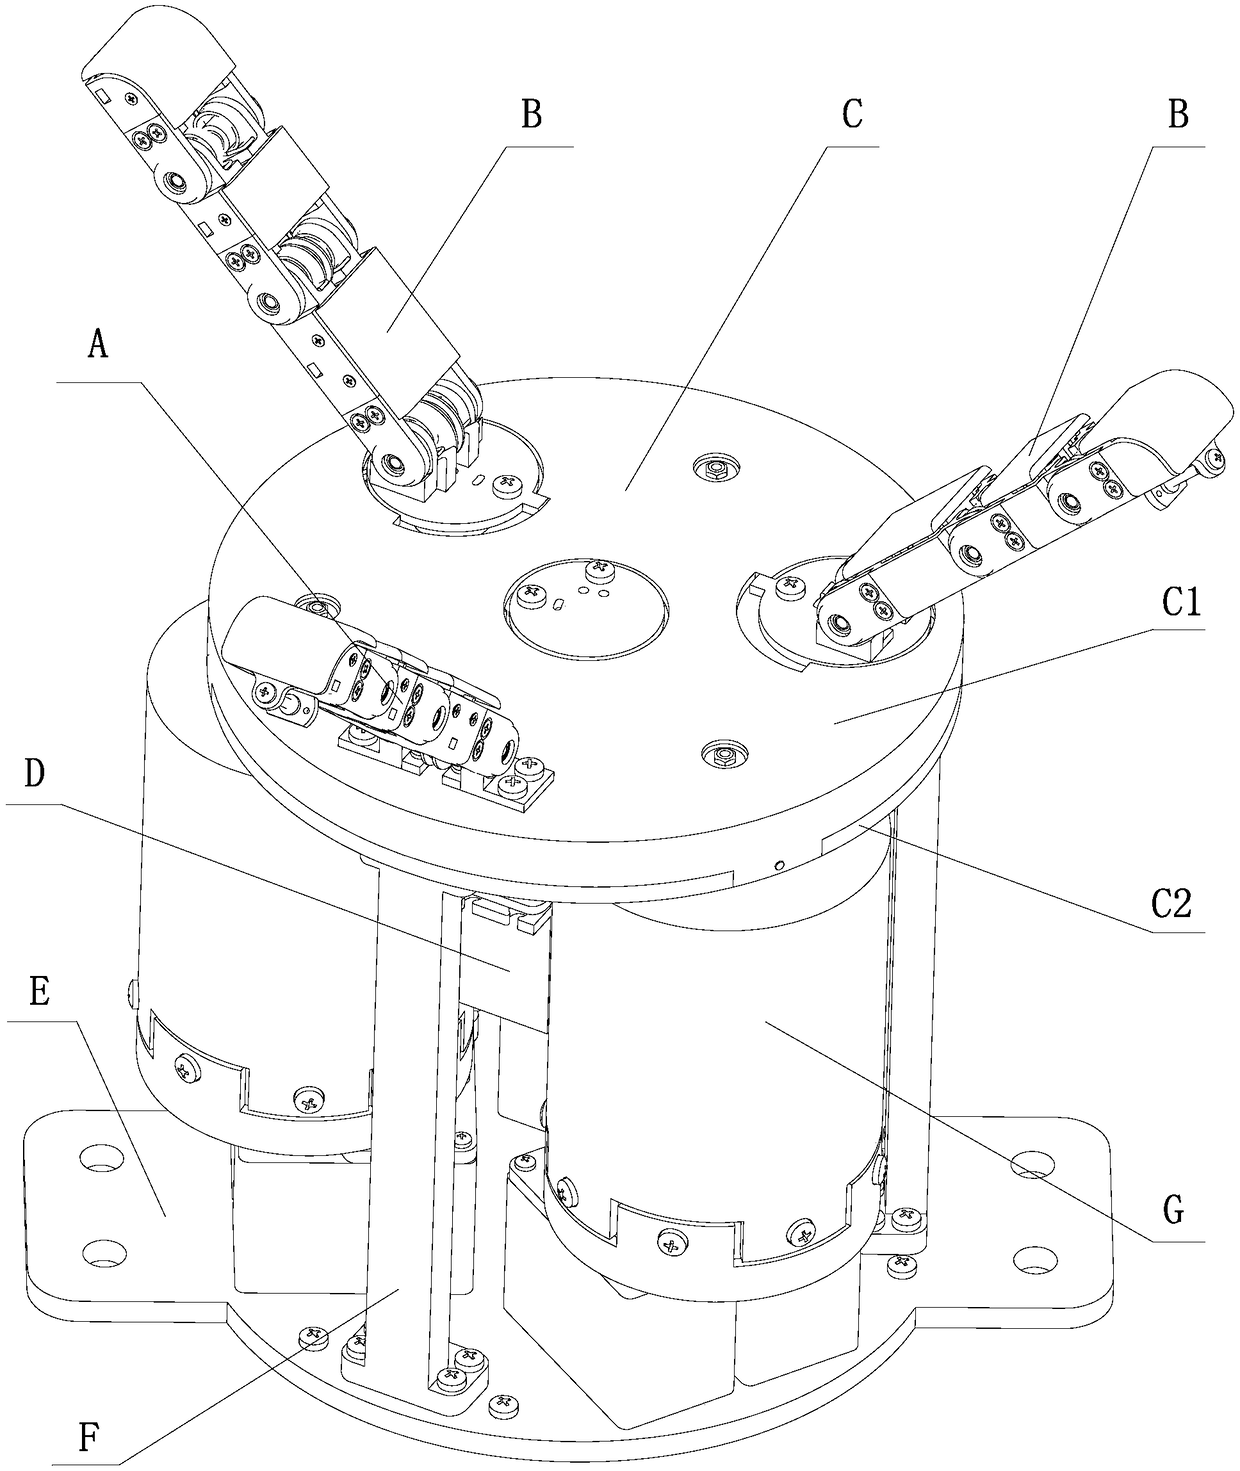 Underactuated variable-stiffness manipulator based on variable-stiffness elastic joints